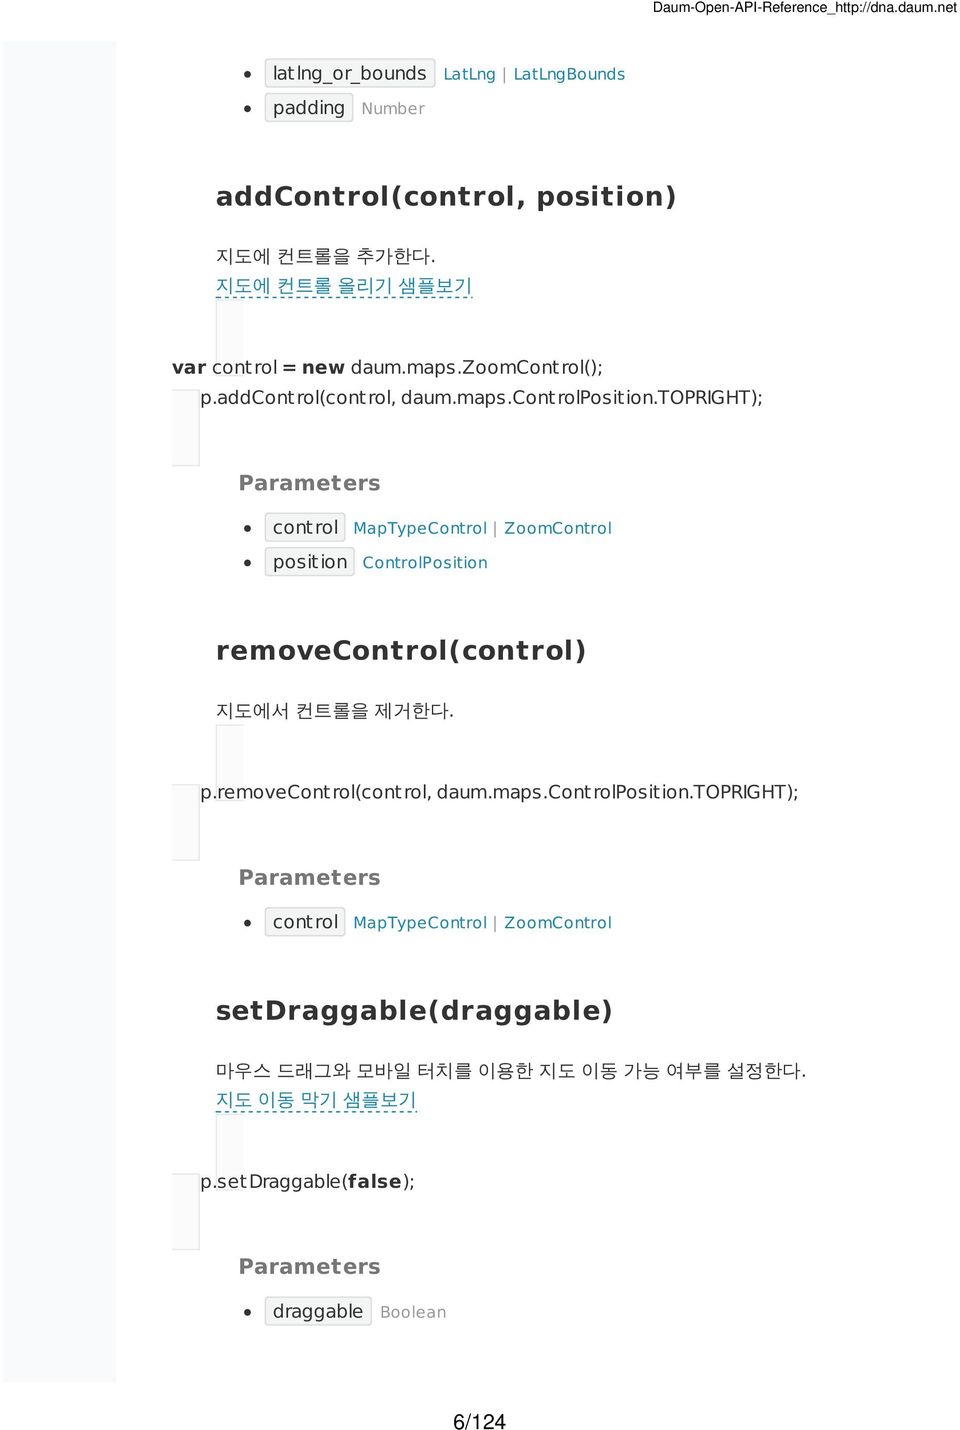 topright); cont rol MapTypeControl ZoomControl posit ion ControlPosition removecontrol(control) 지도에서 컨트롤을 제거한다. map.